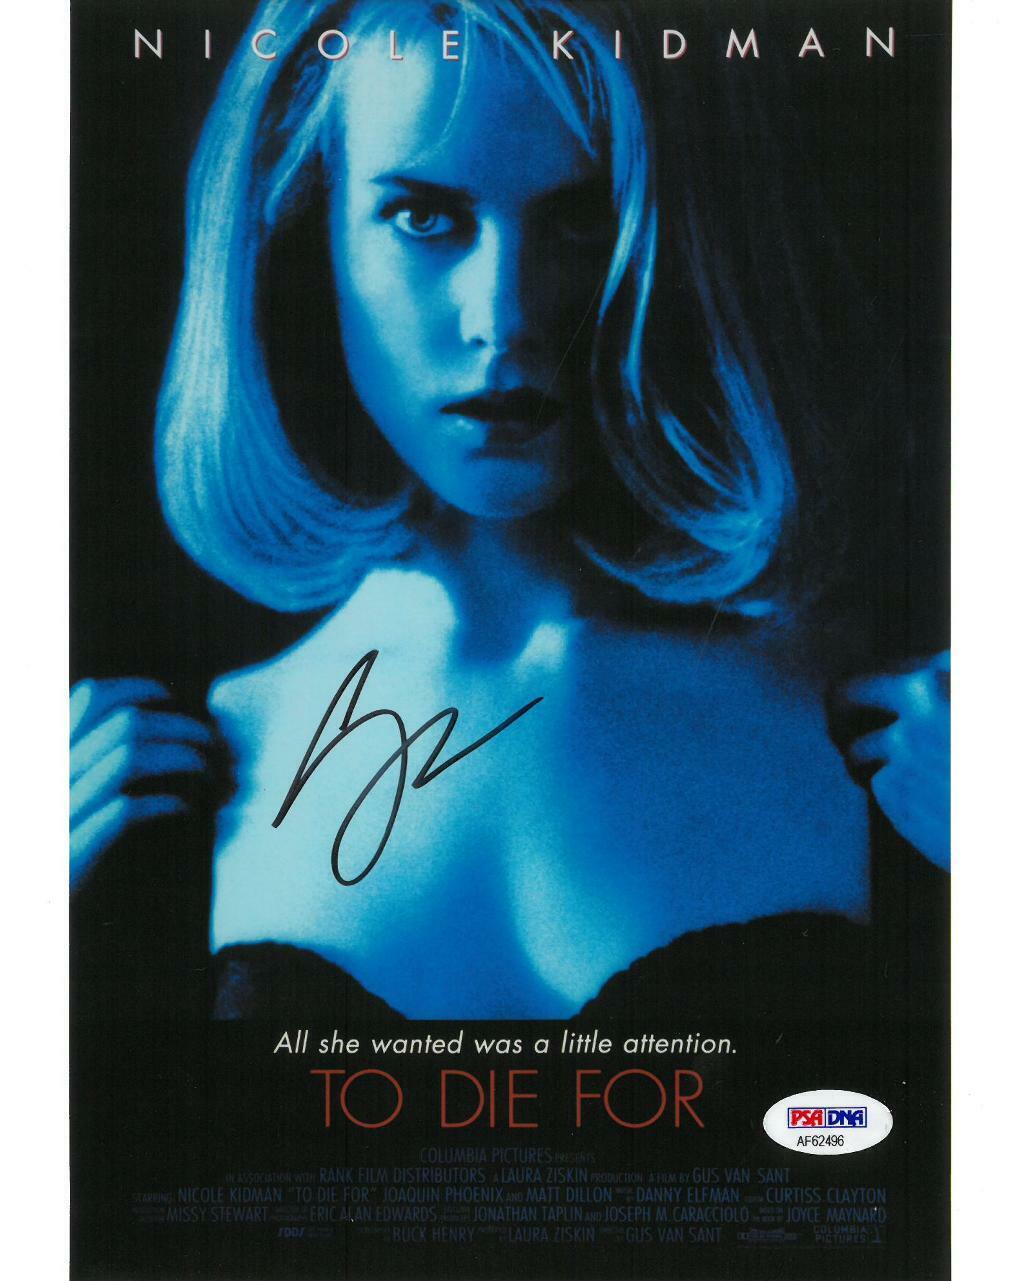 Gus Van Sant Signed To Die For Authentic Autographed 8x10 Photo Poster painting PSA/DNA #AF62496